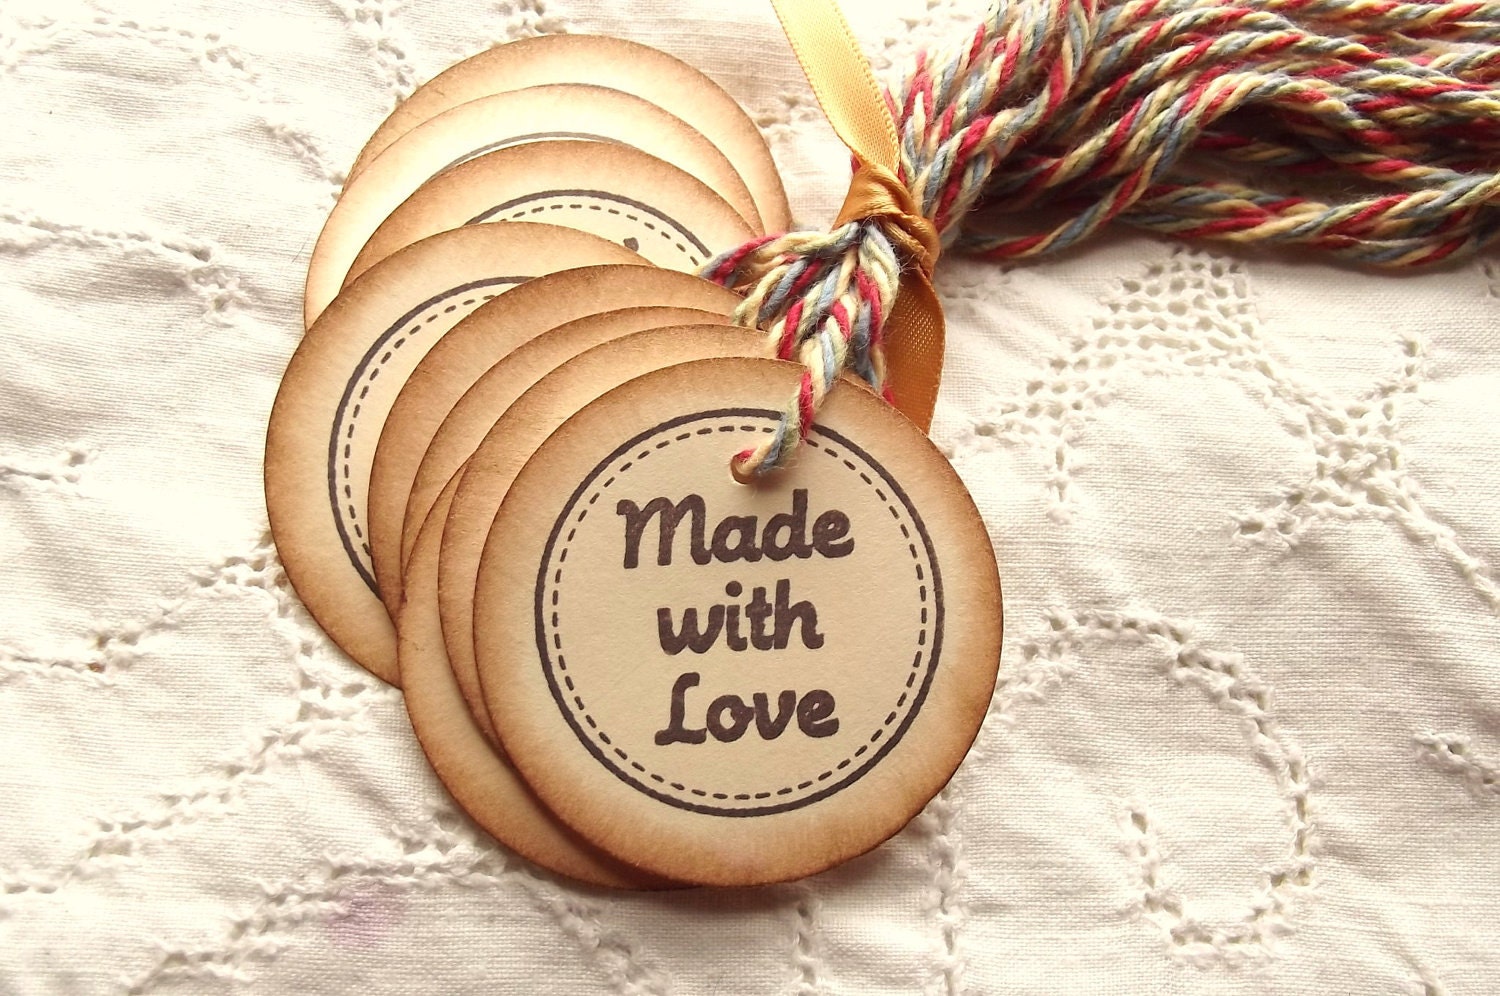 Made with Love Circle Hang Tags - Stitched Border, Colorful Cotton Twine, Brown, Vintage Feel 12